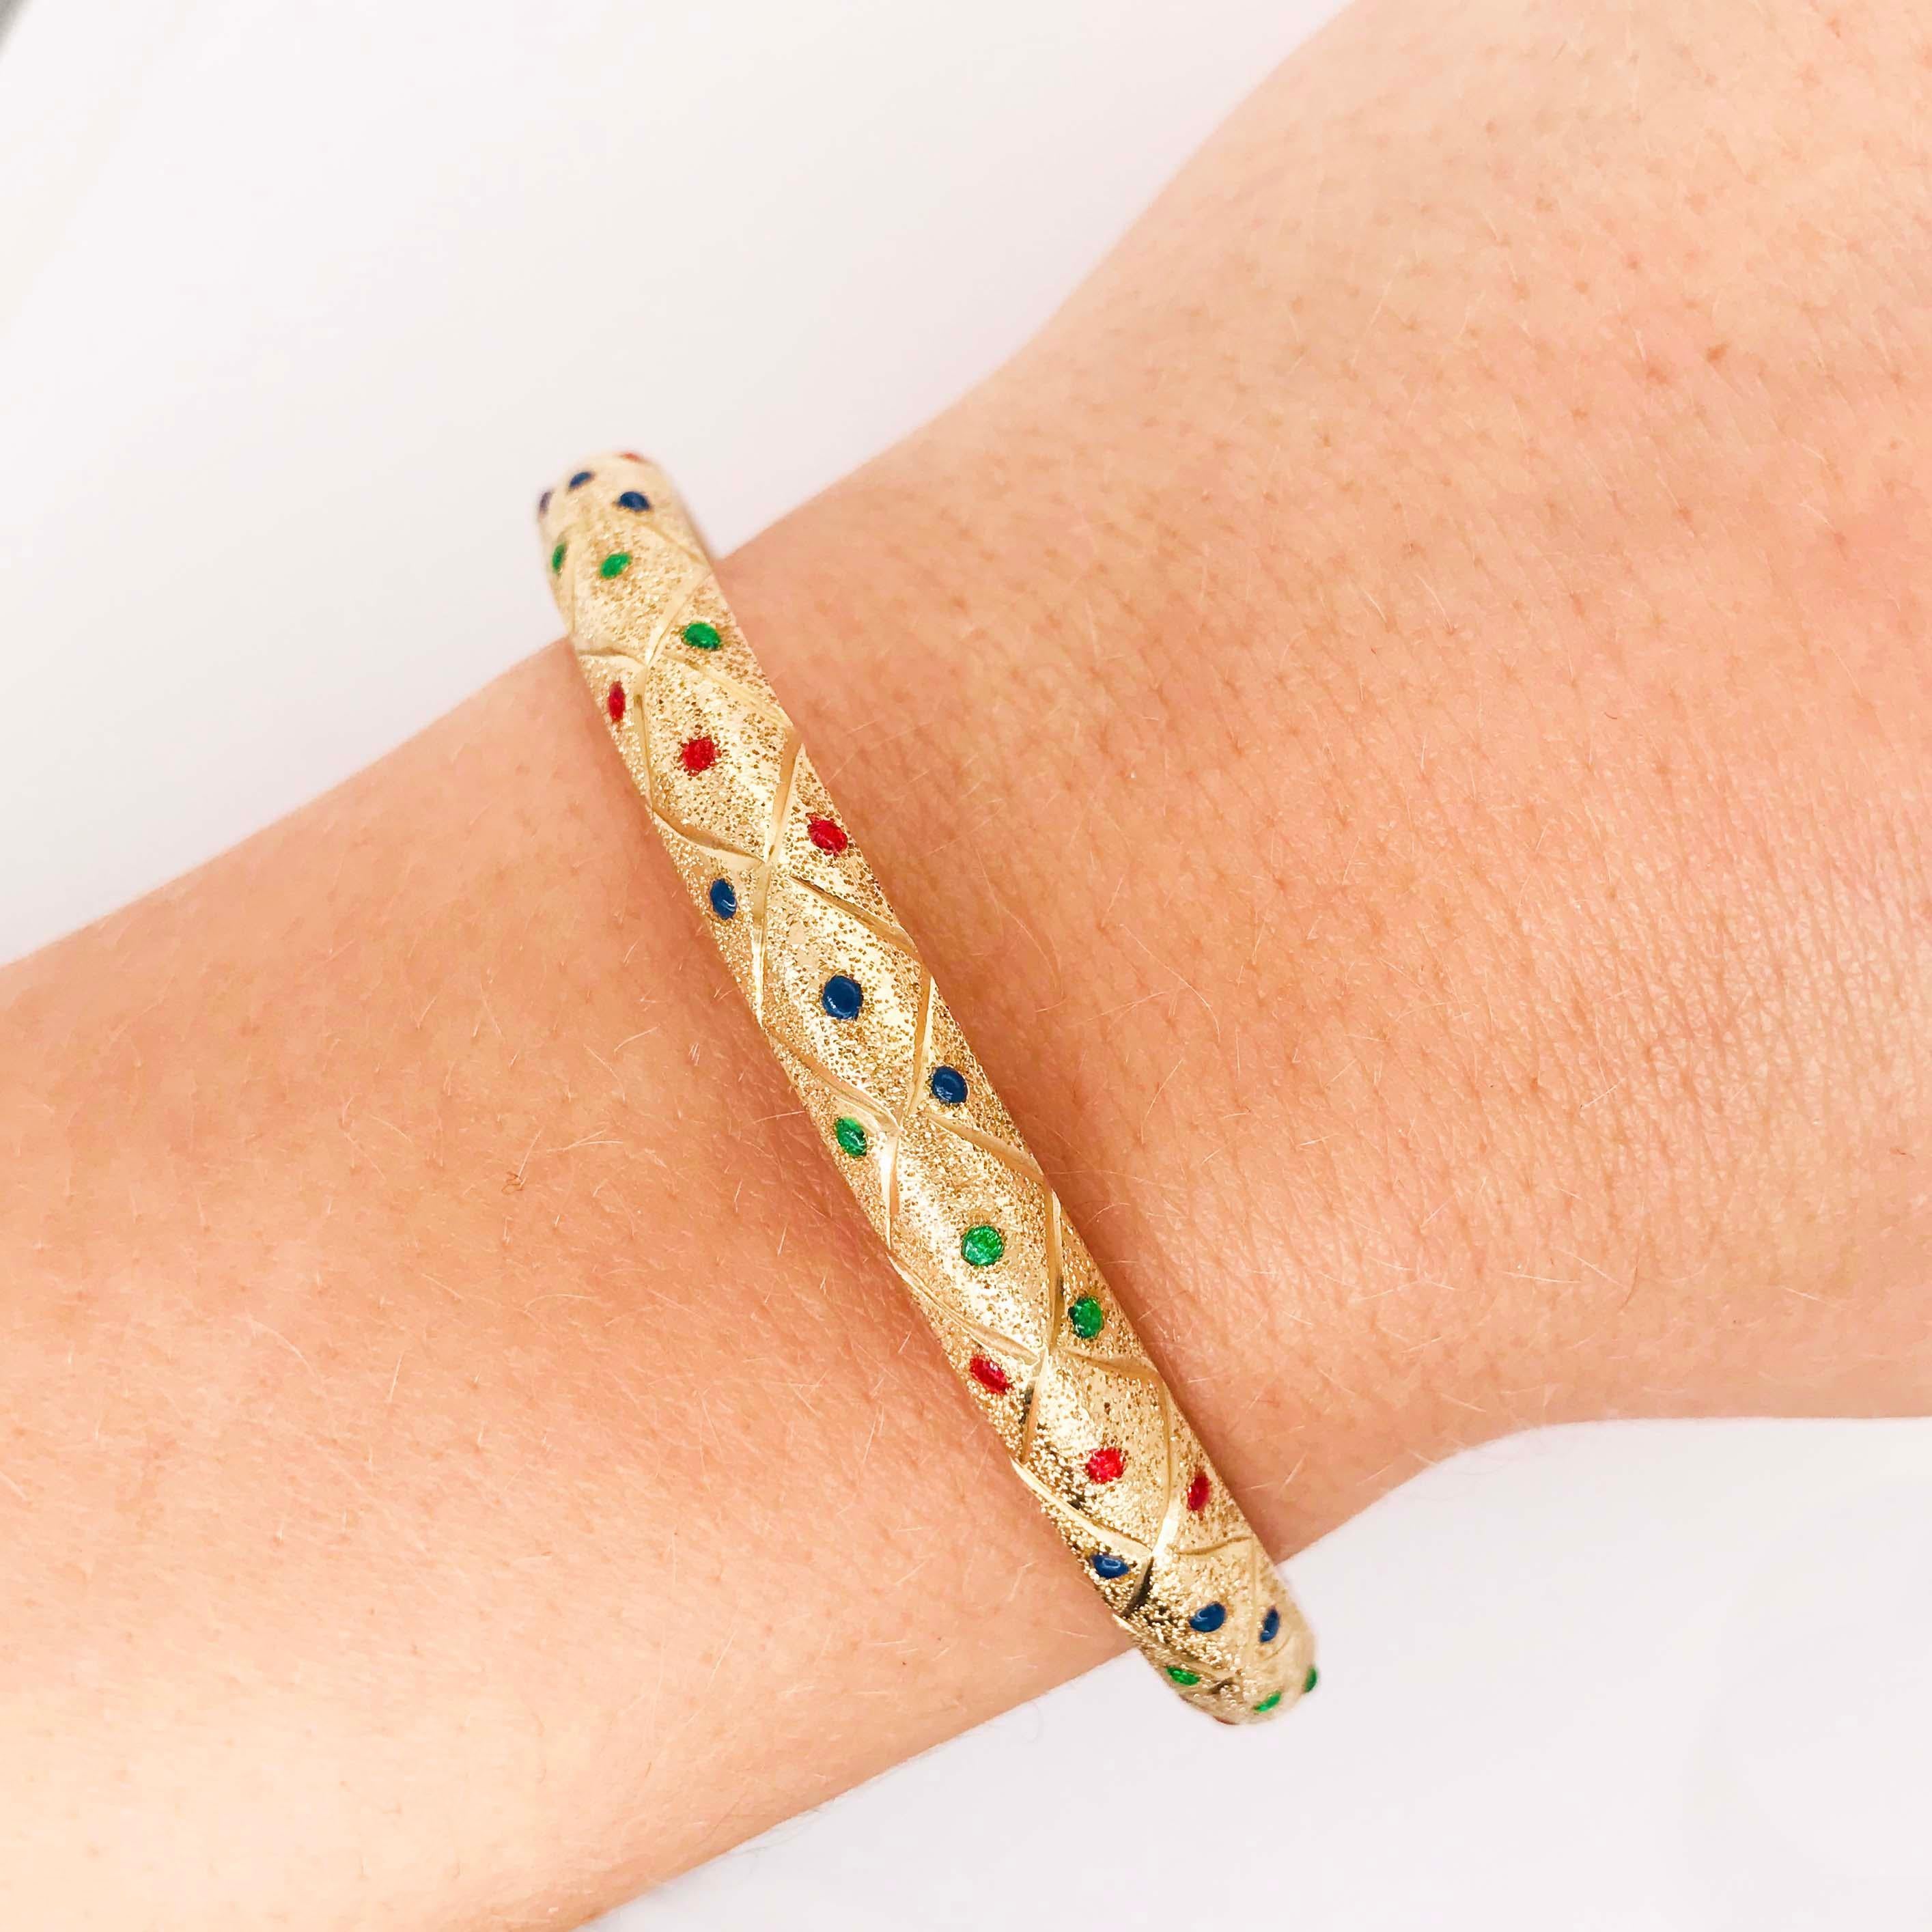 This gorgeous gold bangle bracelet is a custom fine jewelry piece. The 14k handmade gold bangle has a one of a kind design! On the bangle there is a fun, bold pattern of red, blue and green enamel dots that are in an angled pattern. The colors are